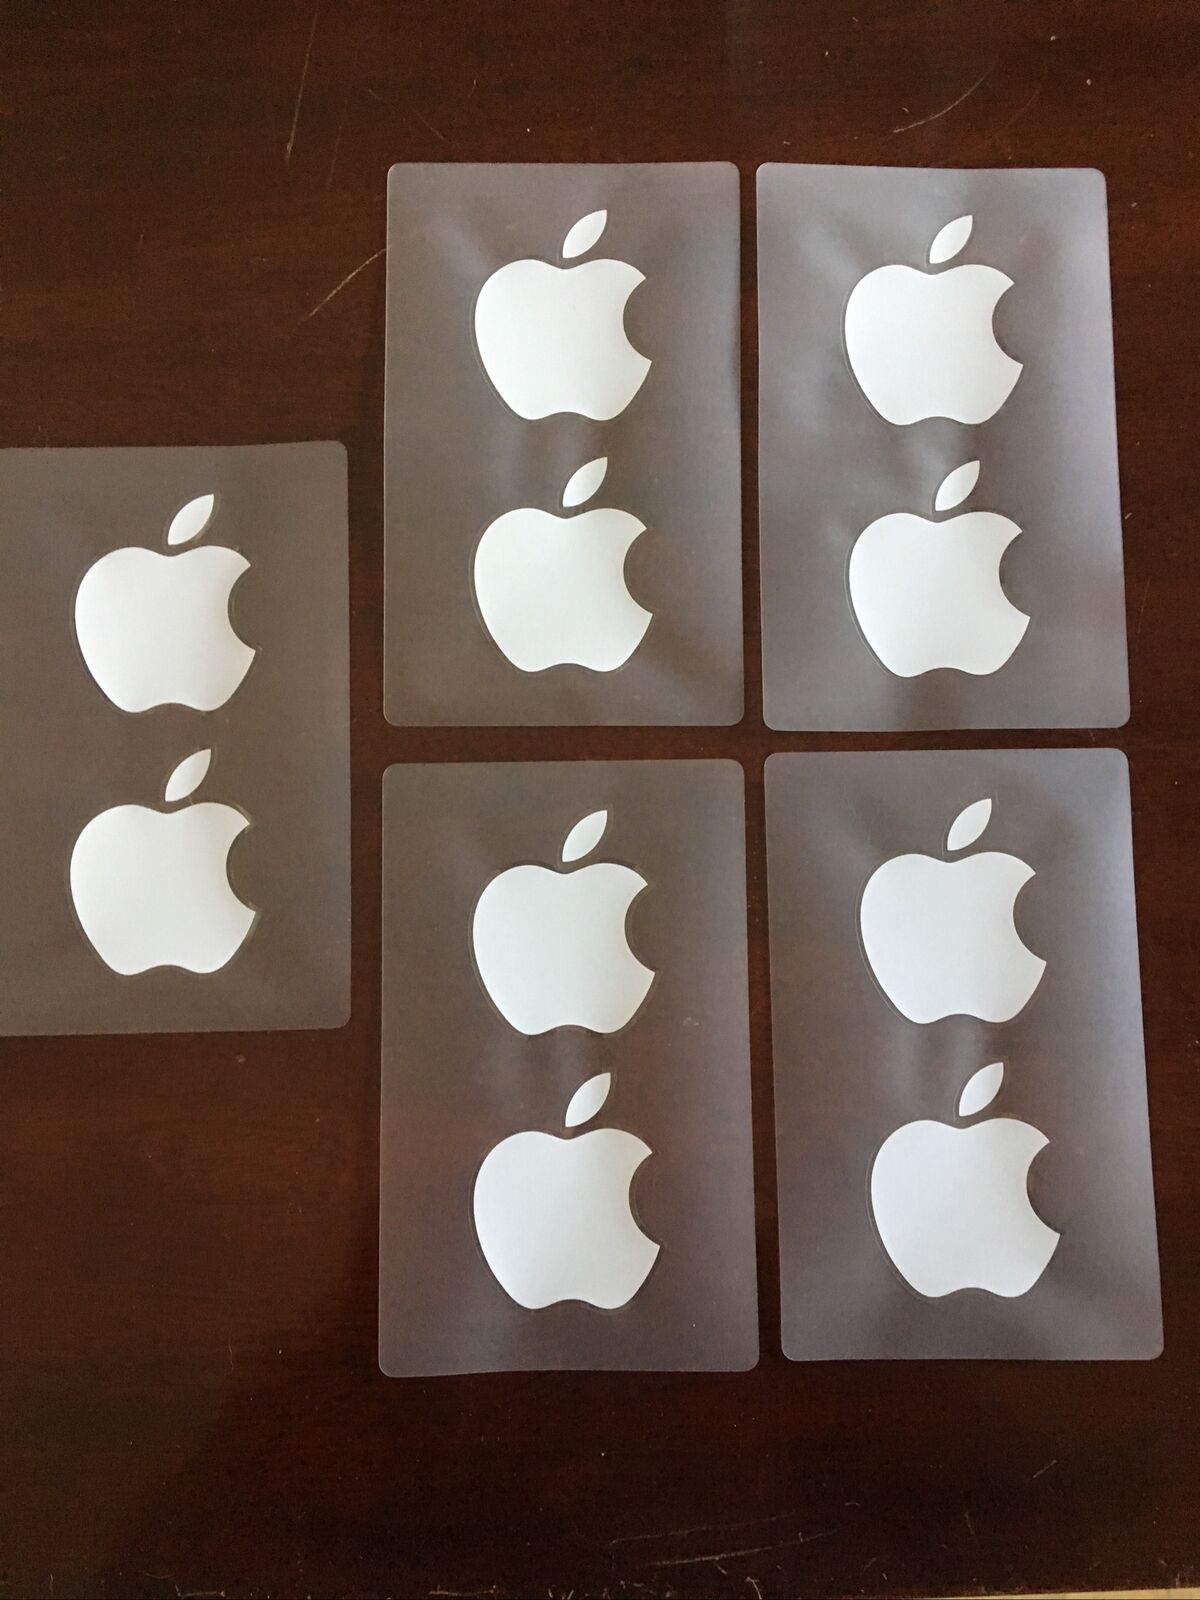 NEW White Apple Logo Sticker Decal - Genuine OEM - Set Of 5 - 10 Total Stickers